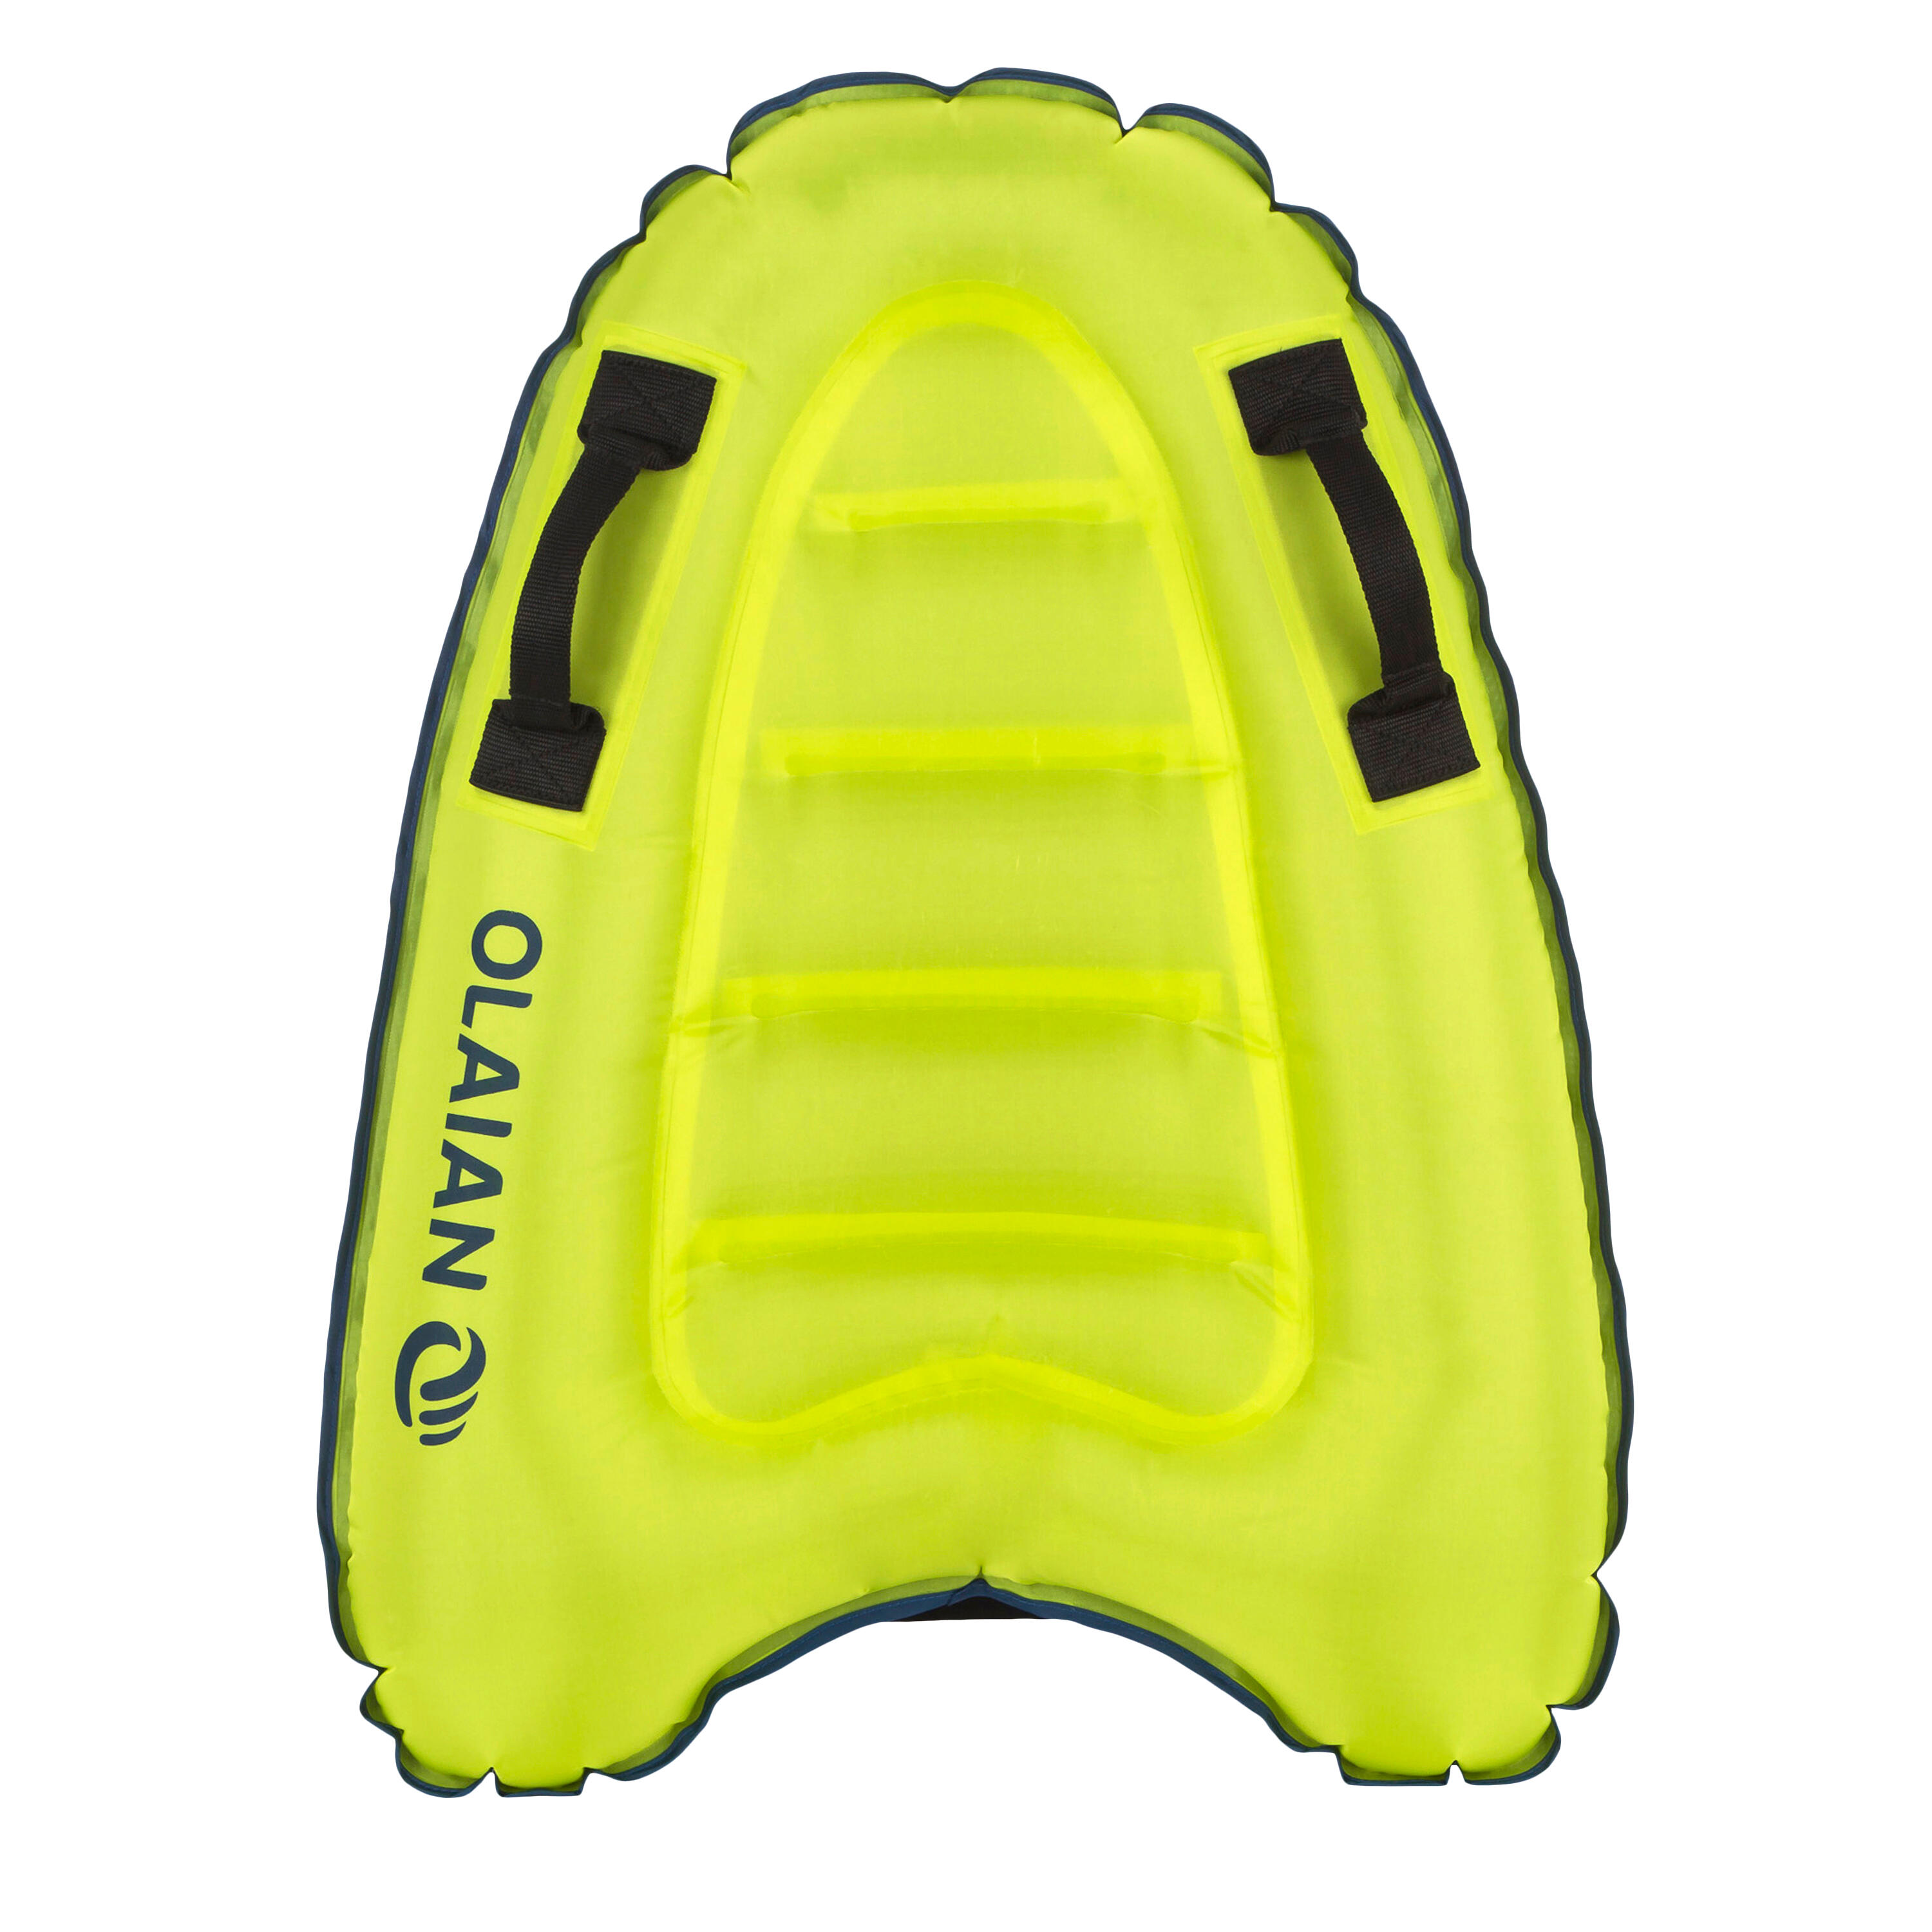 Kids' Inflatable Discovery Bodyboard 